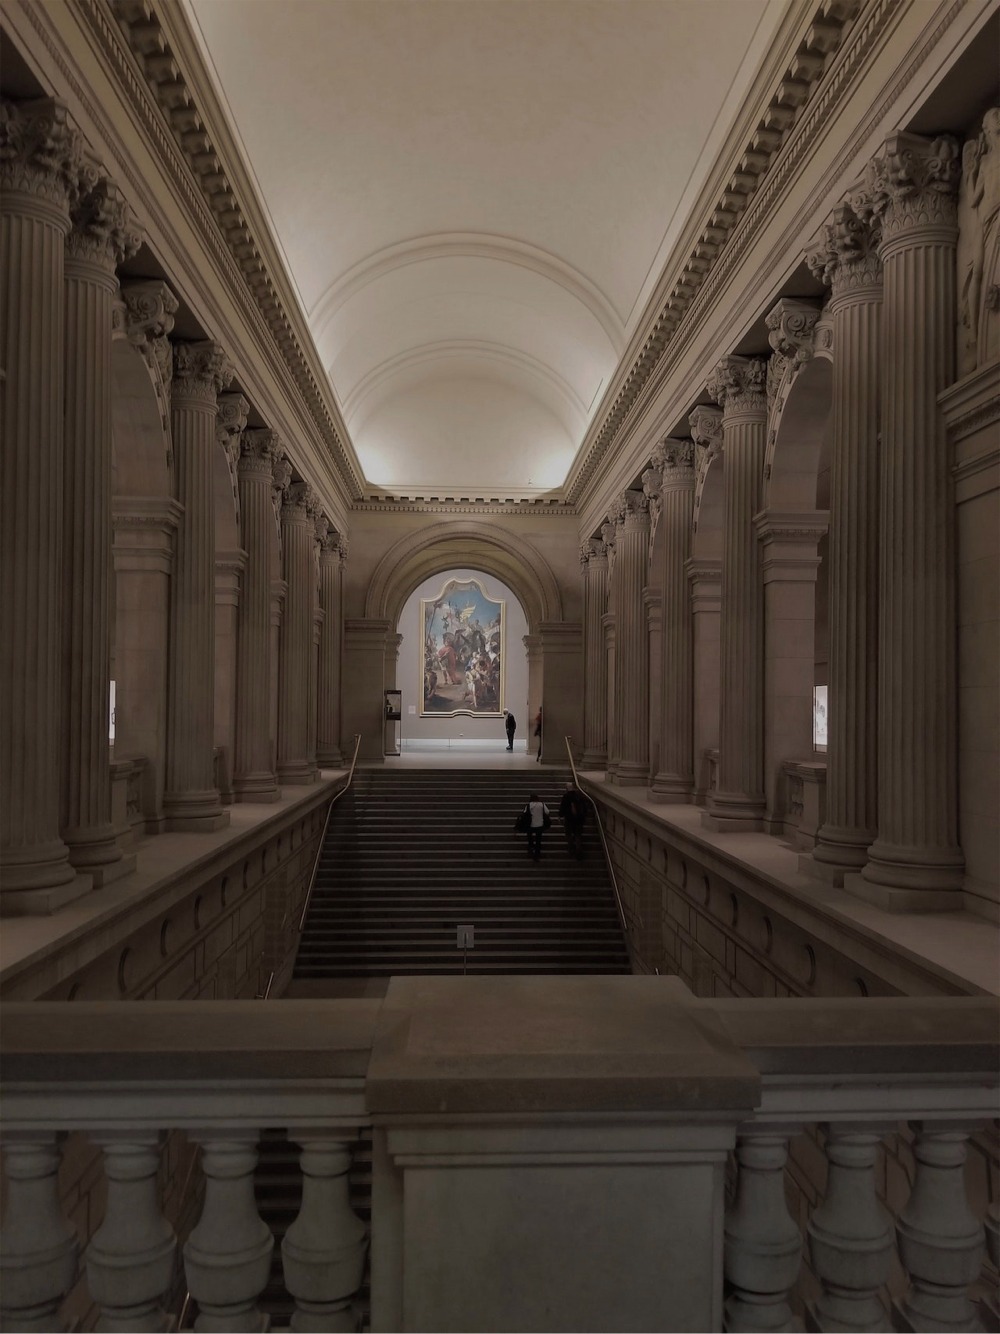 This photograph shows a colonnaded staircase known as the Grand Stairway at the The Metropolitan Museum of Art in New York City.